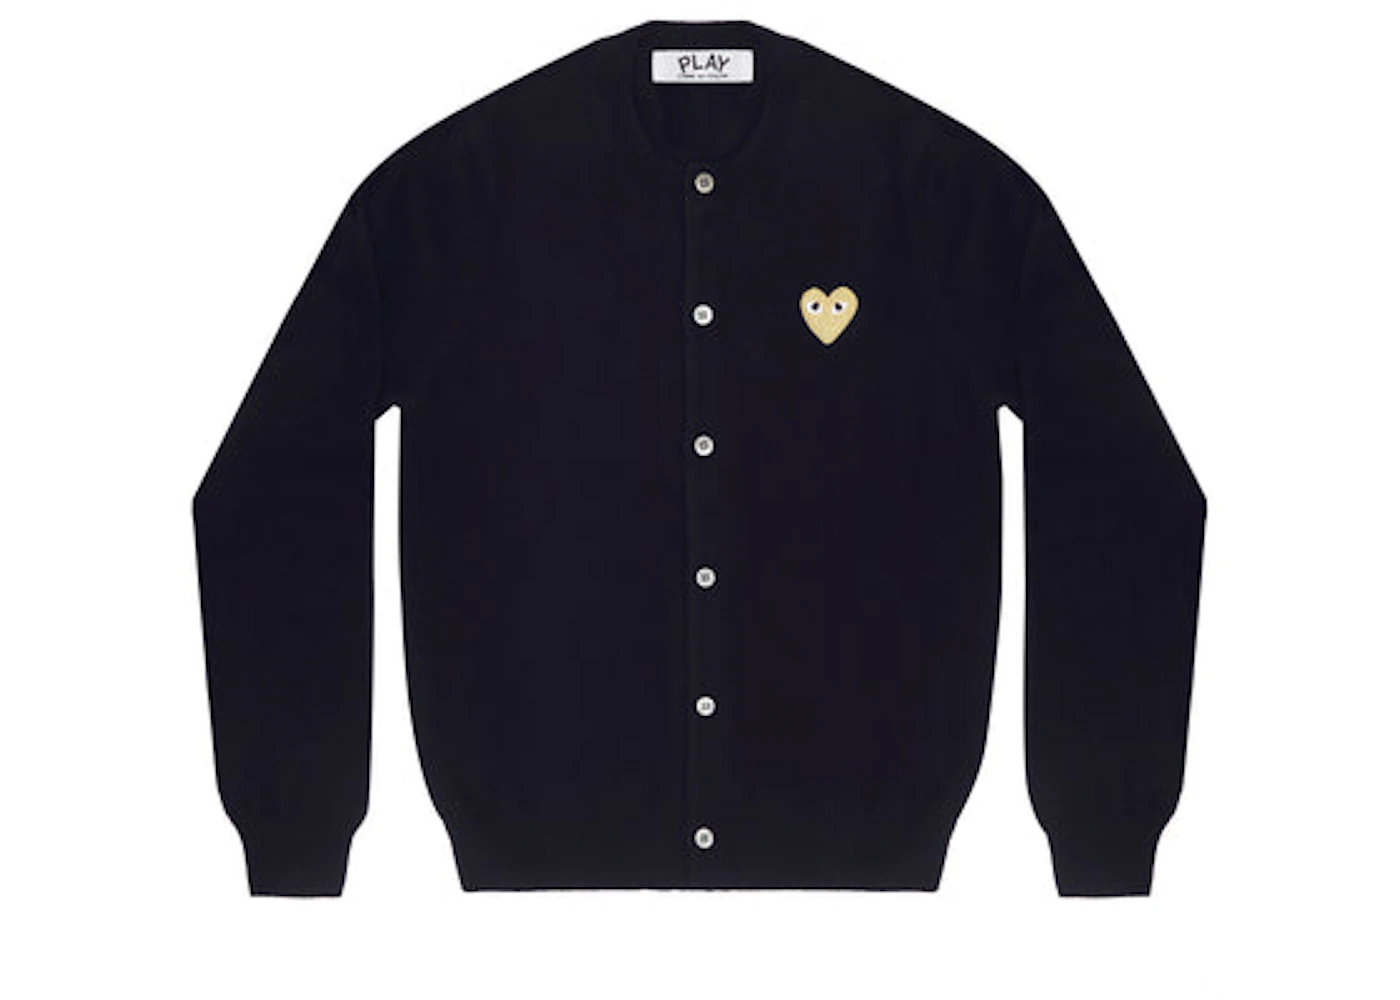 CDG Play Women's Gold Heart Knit Cardigan Sweater Navy - US